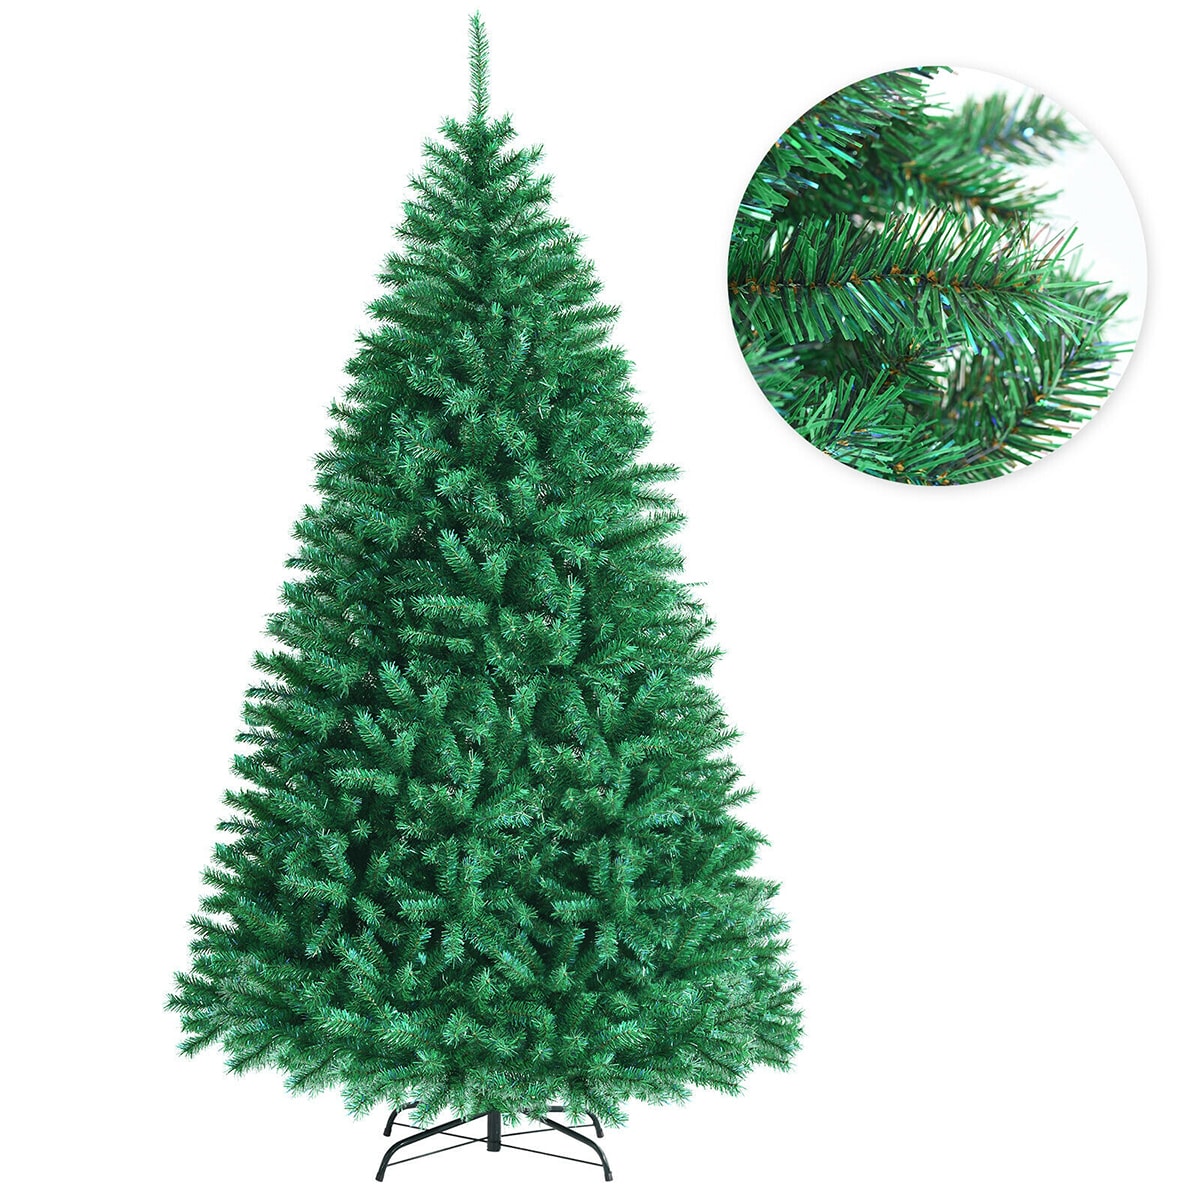 WELLFOR 8-ft Full Artificial Christmas Tree with 1636 Branch Tips - Green  in the Artificial Christmas Trees department at